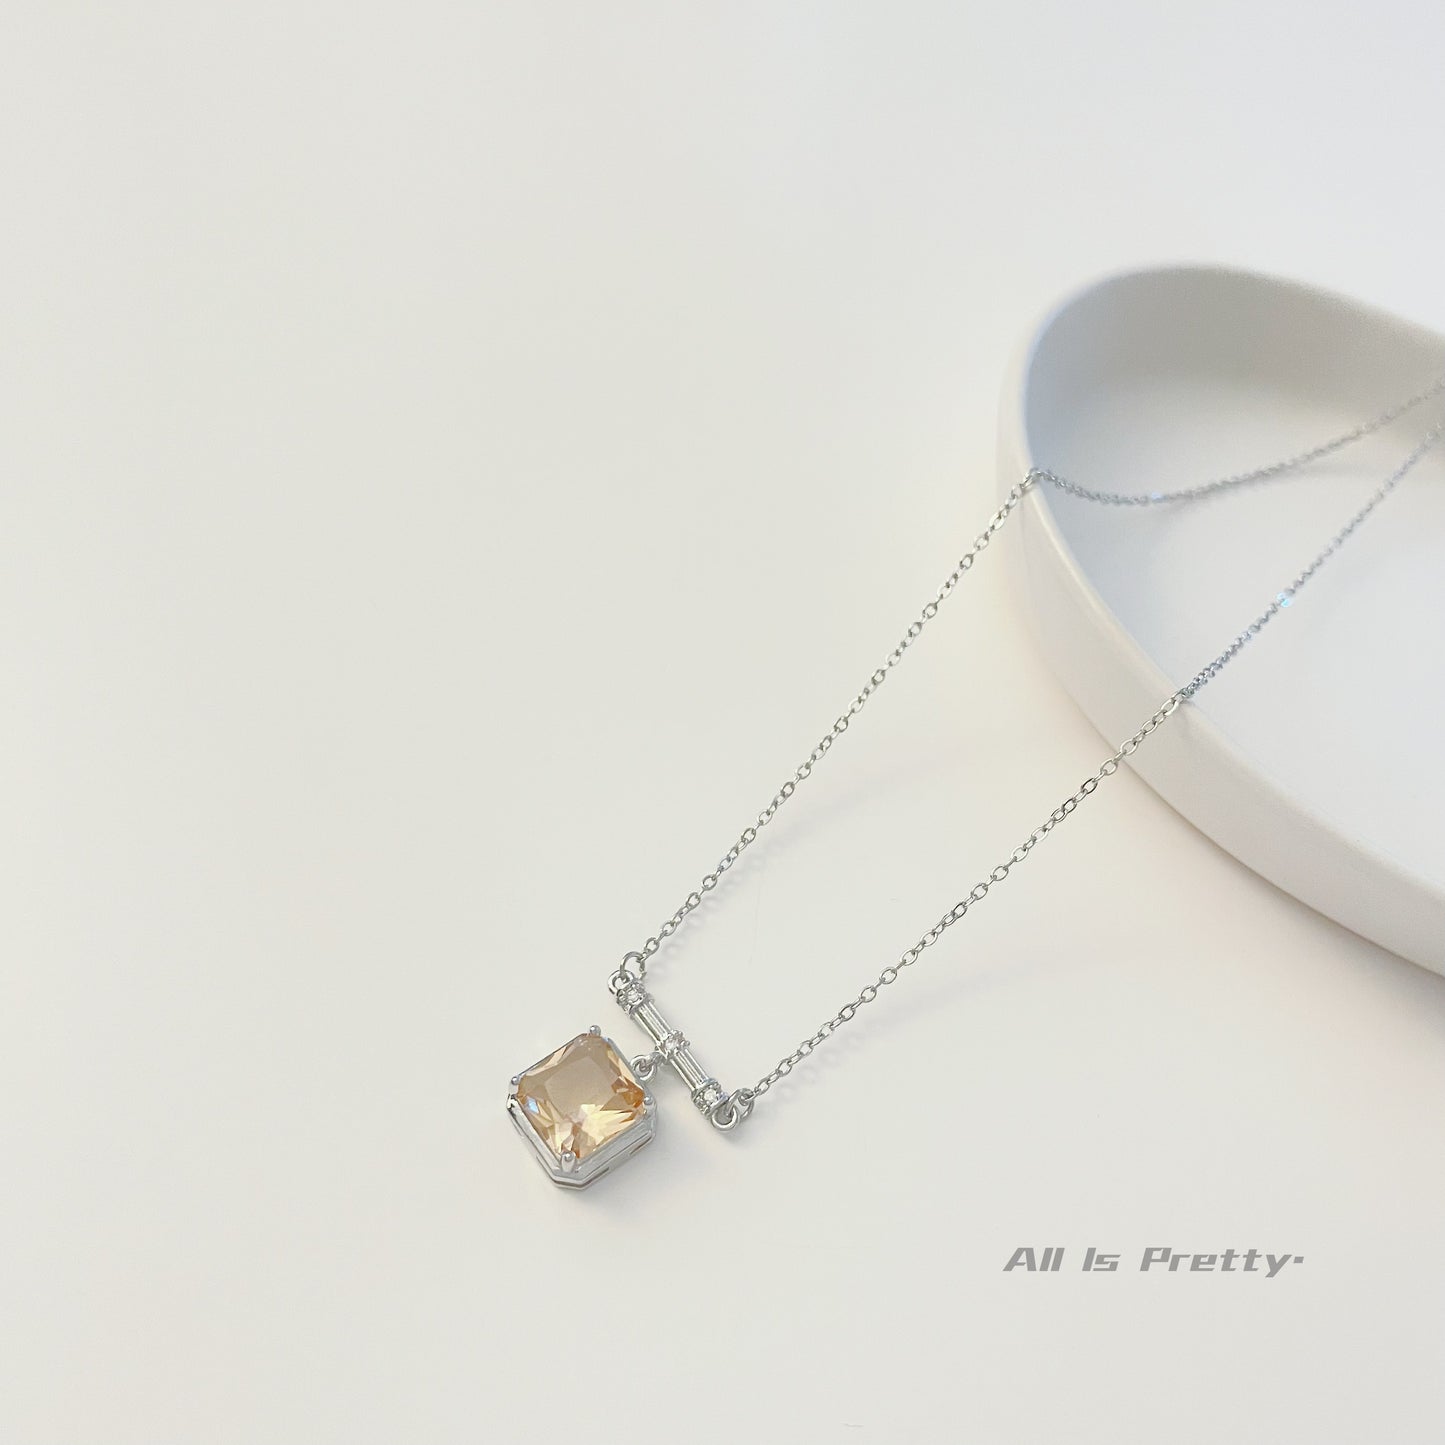 Crystal cube pendant necklace